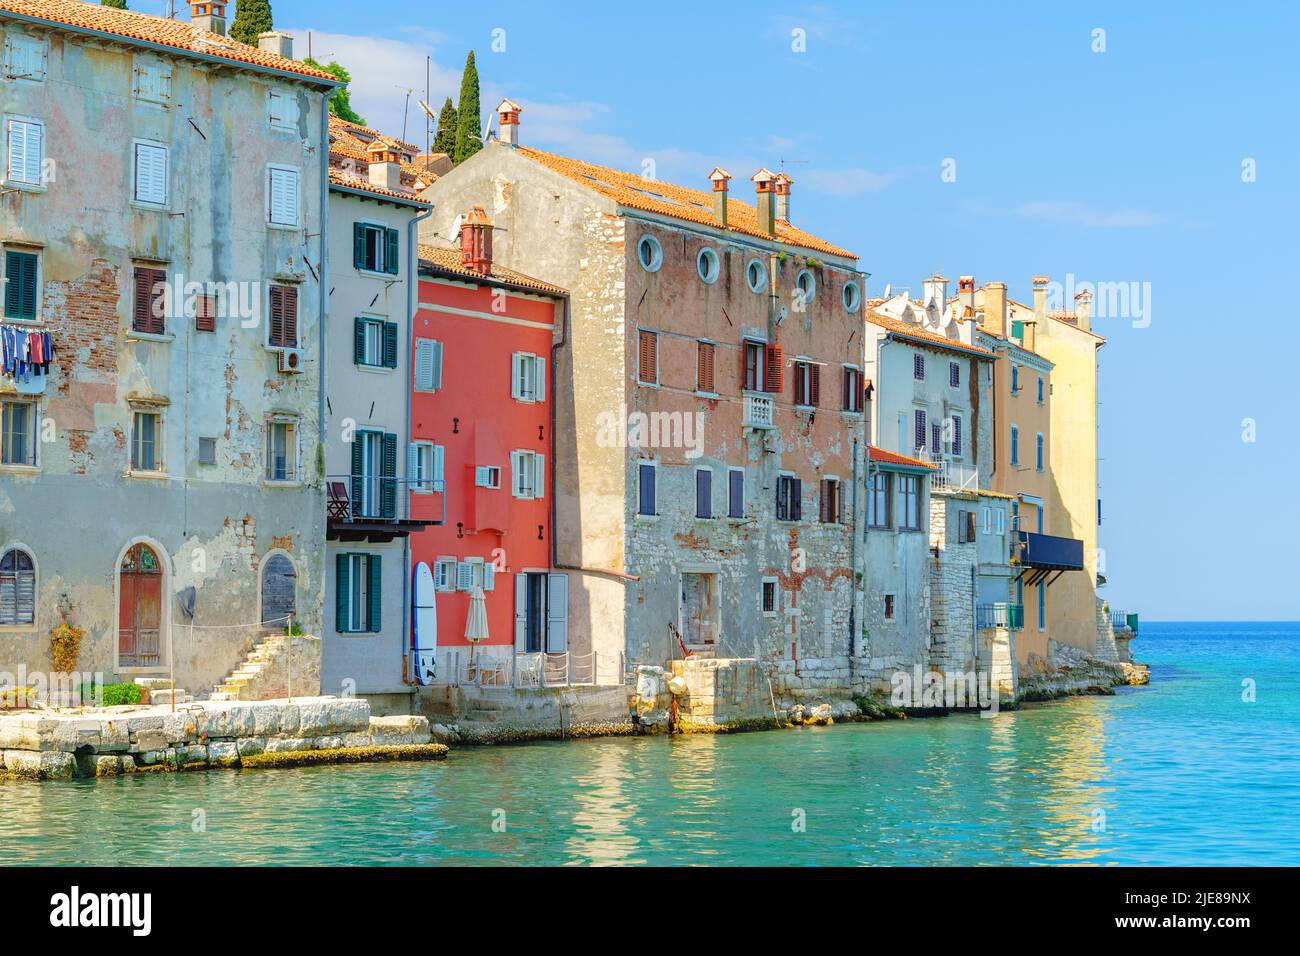 Part of the beautiful architecture of the old colorful houses on the Adriatic coast Stock Photo